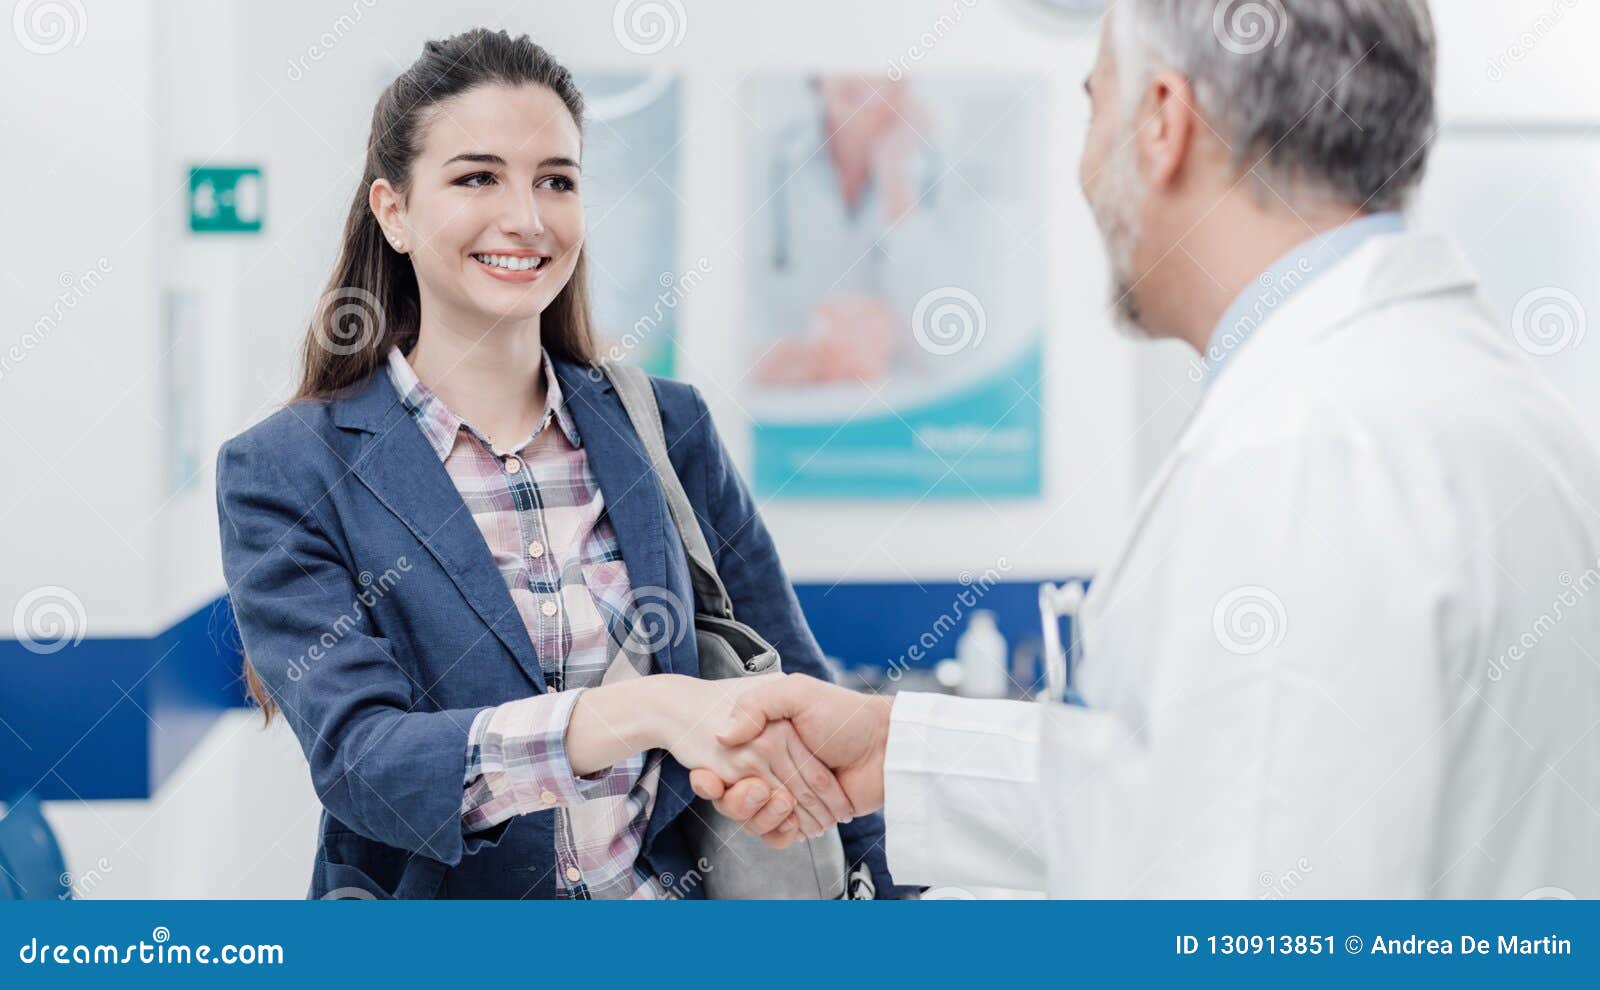 woman meeting the doctor and shaking hands